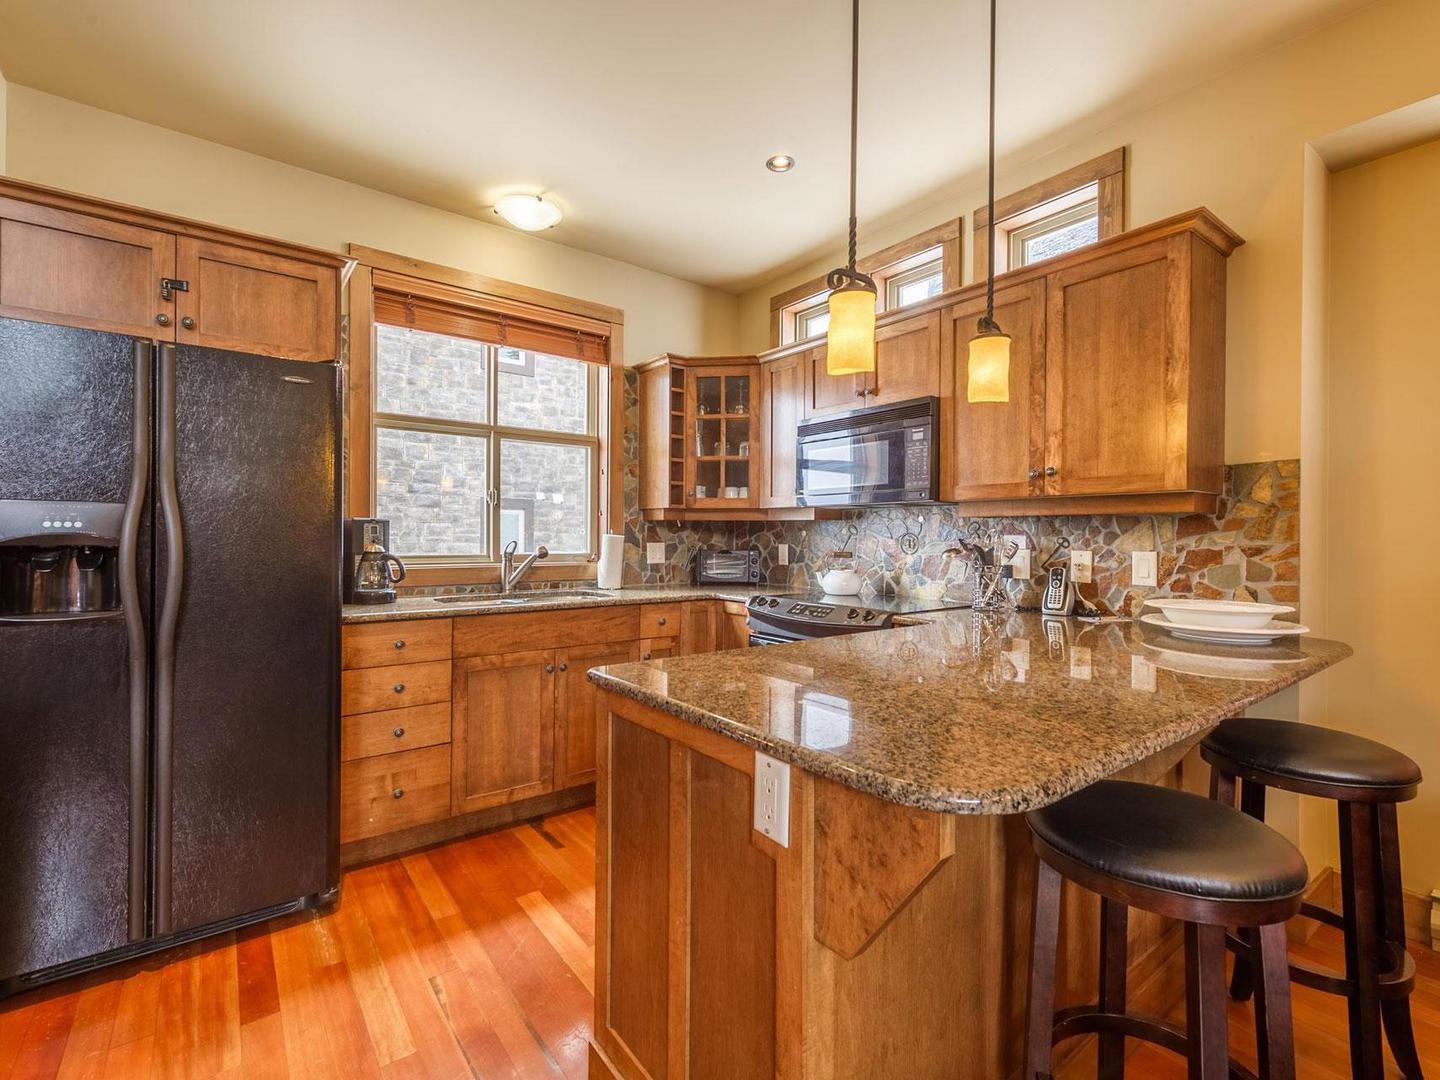 The open concept gourmet kitchen with hardwood floors and warm, wood accents in luxury vacation rental South Point #15 at Big White Ski Resort.